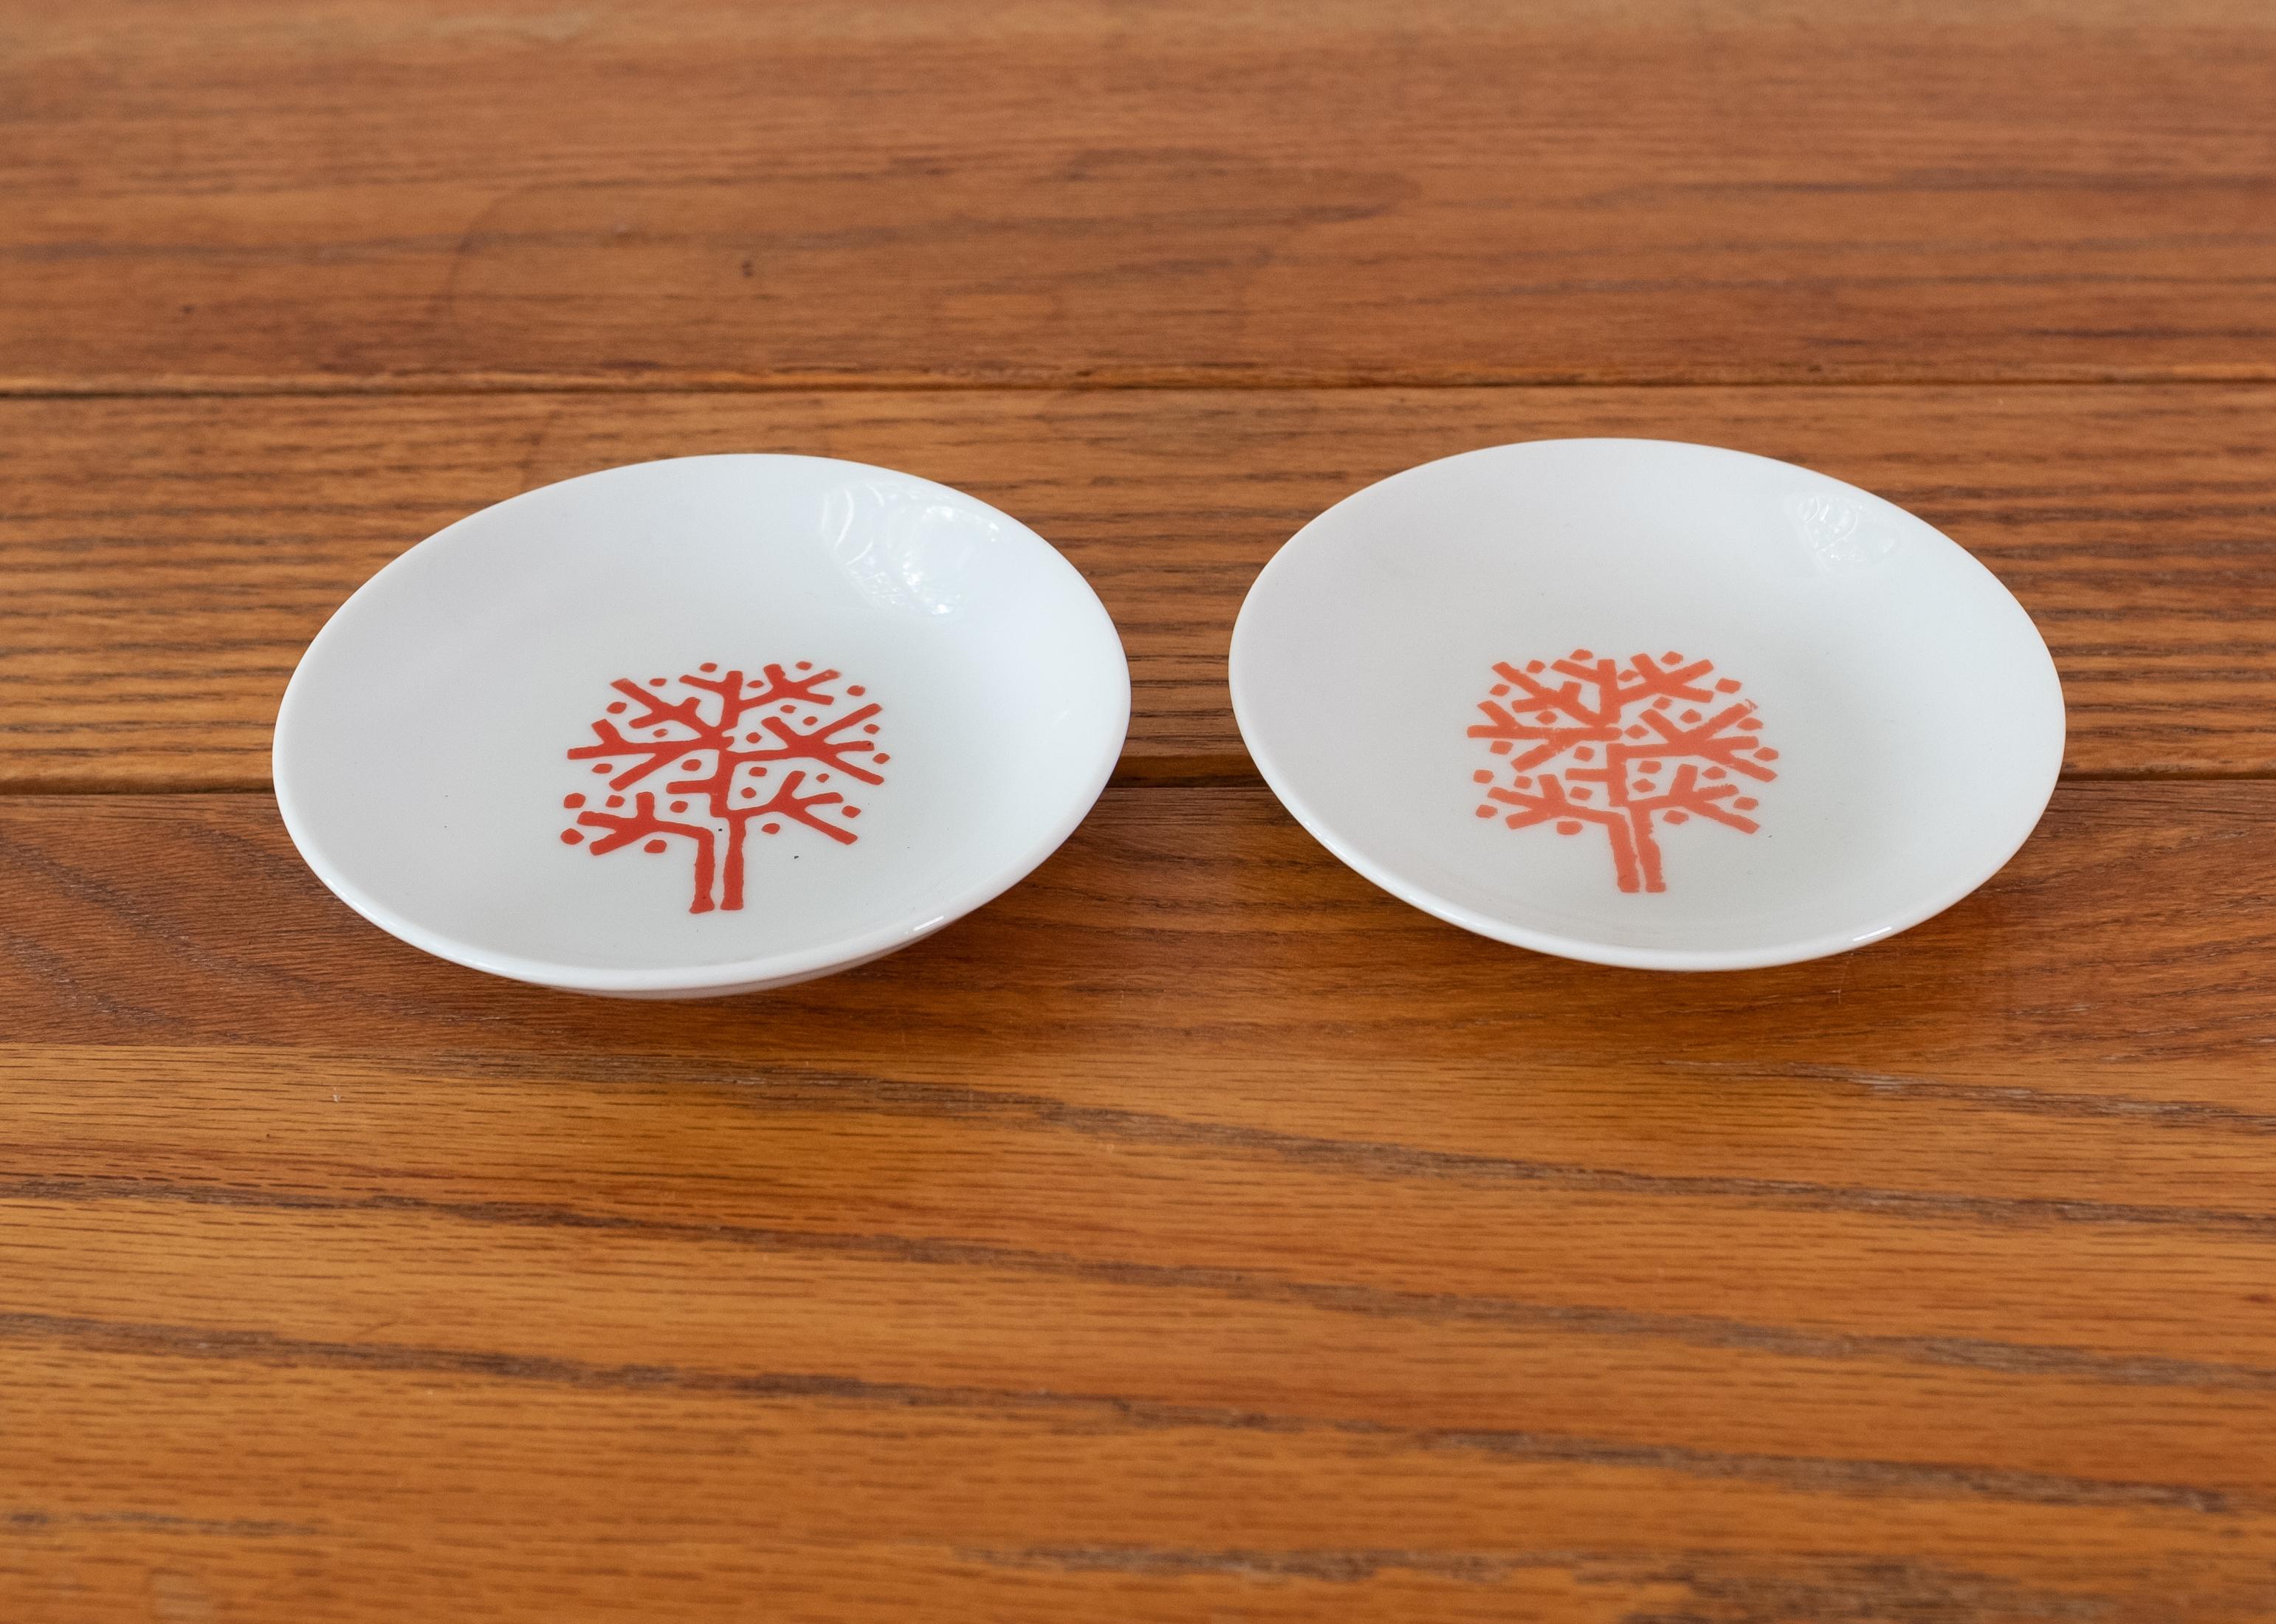 Two Emil Antonucci designed small catch-all plates or ashtrays for The Four Seasons hotel. Signed on the bottom.